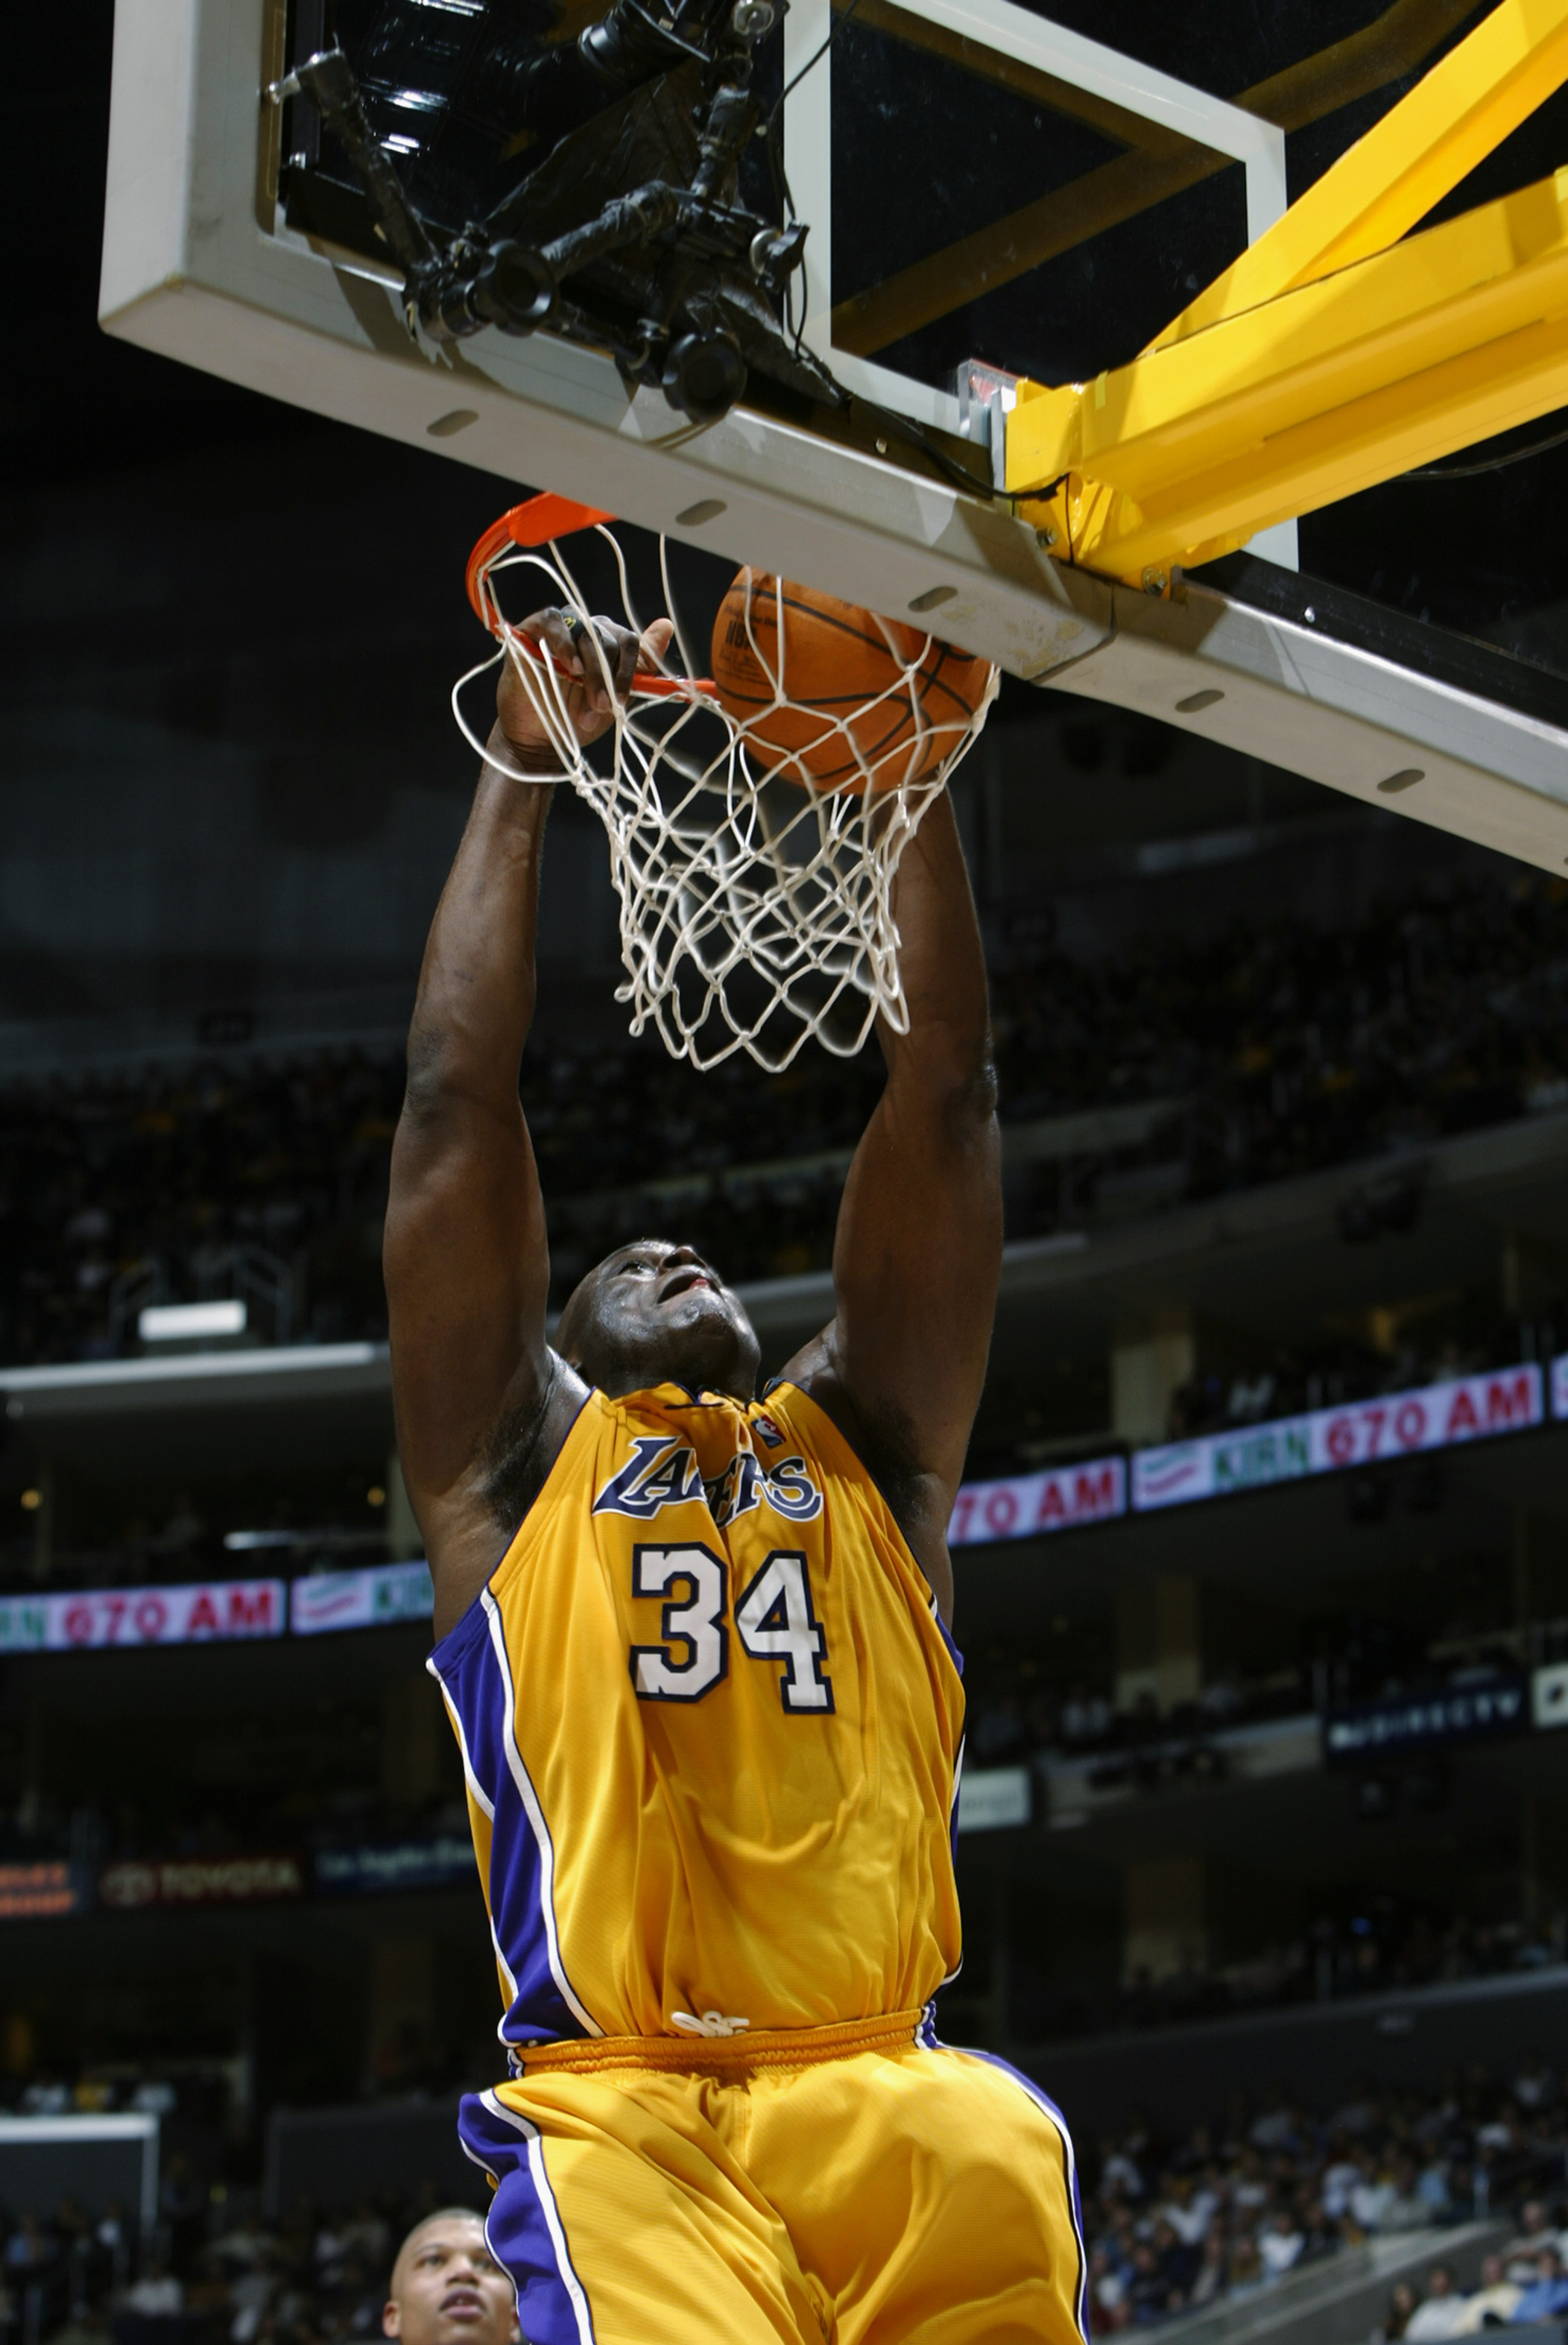 LOS ANGELES - DECEMBER 3:  Shaquille O'Neal #34 of the Los Angeles Lakers slam dunks during the game against the Memphis Grizzlies at Staples Center on December 3, 2002 in Los Angeles, California.  The Lakers won 101-91.  NOTE TO USER: User expressly ackn